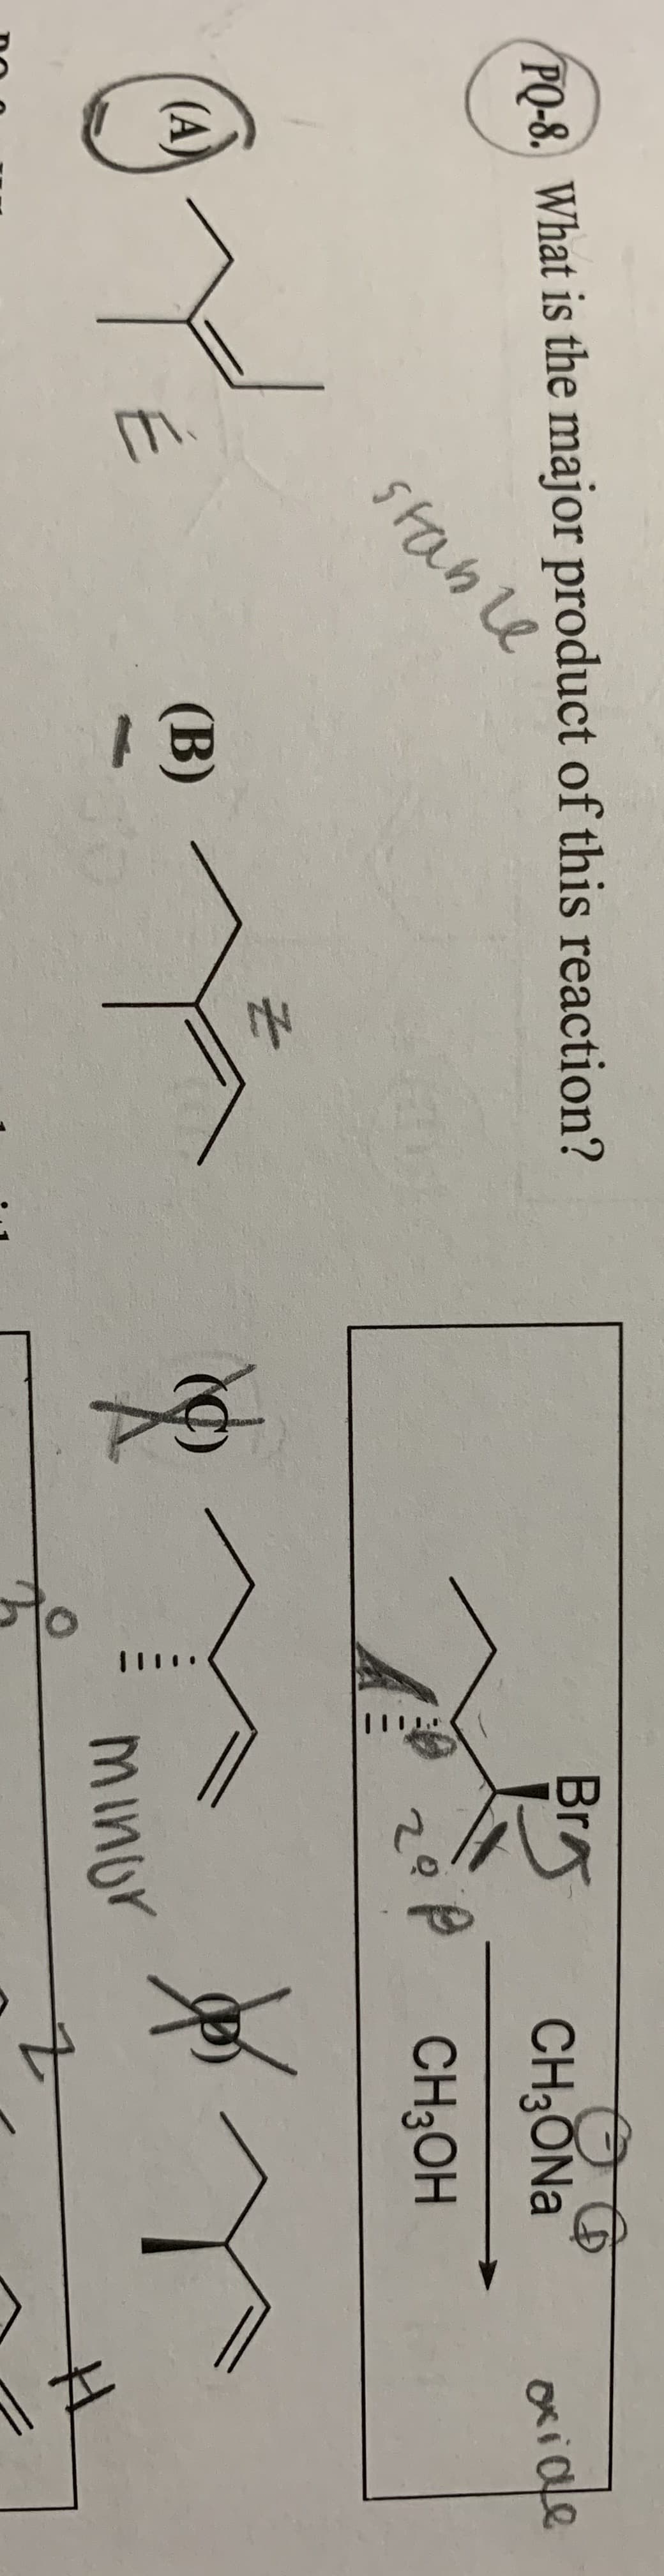 PO-8. What is the major product of this reaction?
Br
stanle
CH3ONA
Oxiale
(A)
CH3OH
20
(B)
minor
